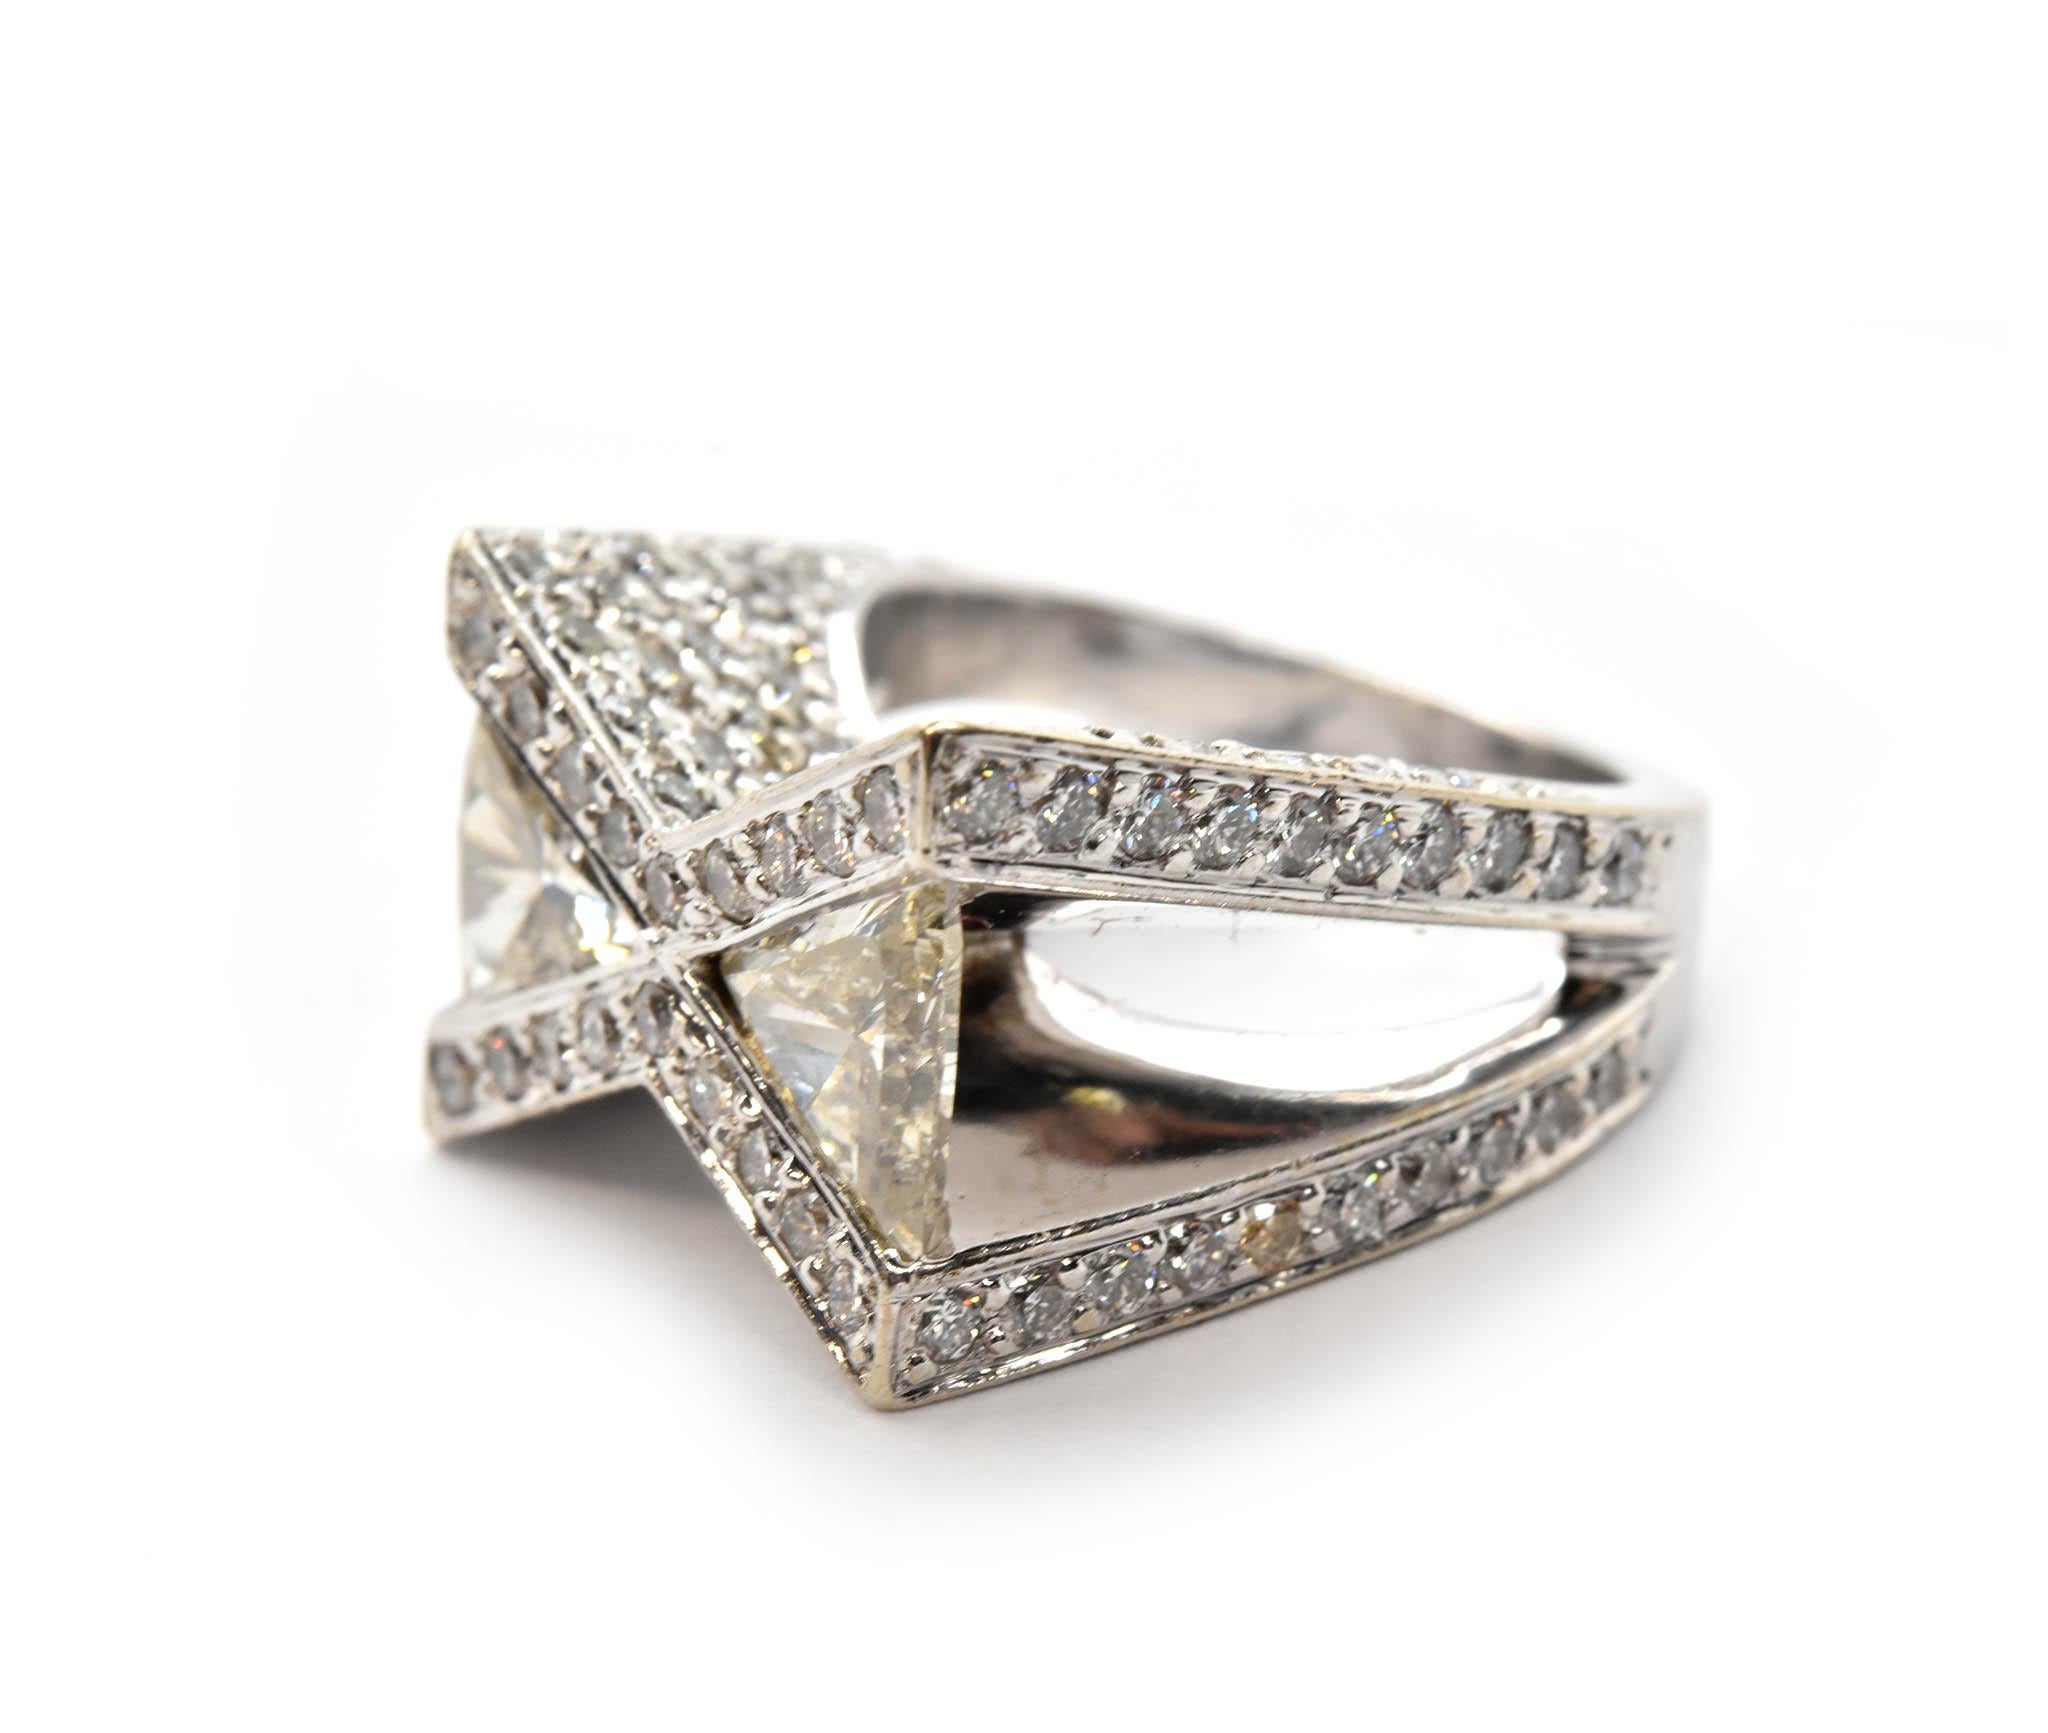 Showcased with the open style mounting are the dual trilliant cut 1.00cttw diamonds set into this ring! The trilliant diamonds are mesmerizing when viewed from any angle, however seeing the underside of them showcases their fire perfectly! Set on